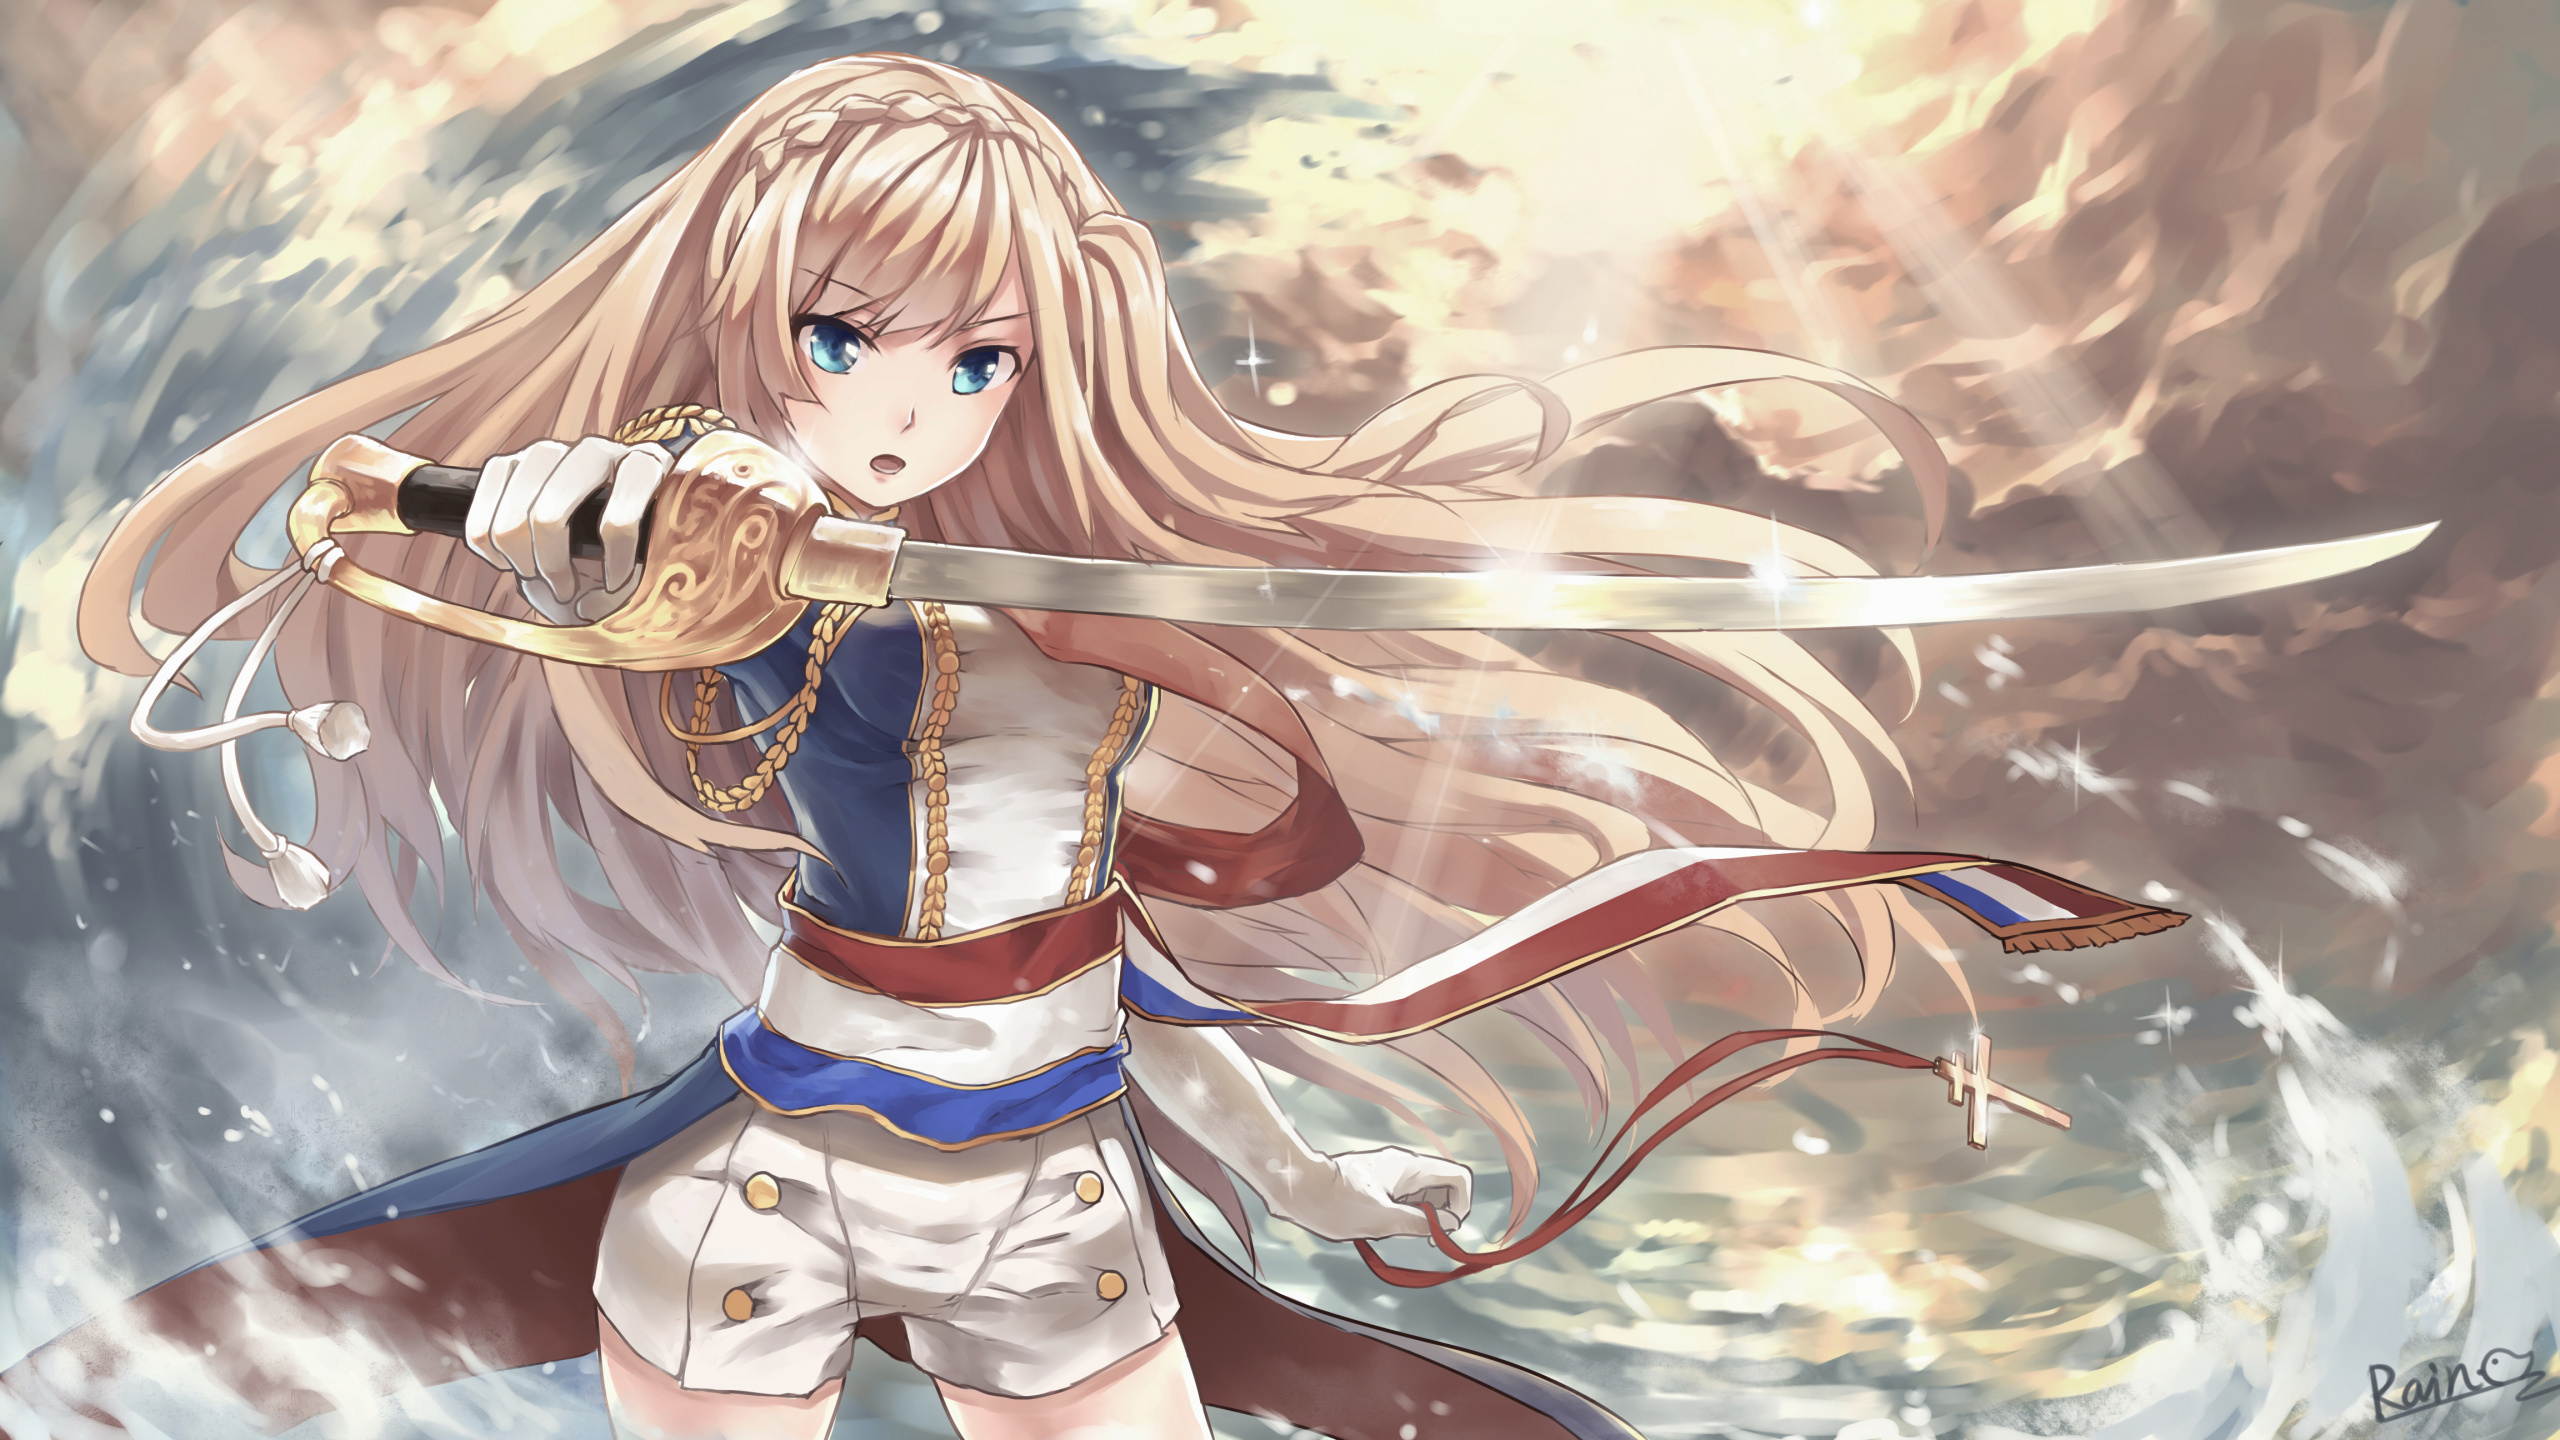 Personnage D'anime Fille Aux Cheveux Blonds. Wallpaper in 2560x1440 Resolution